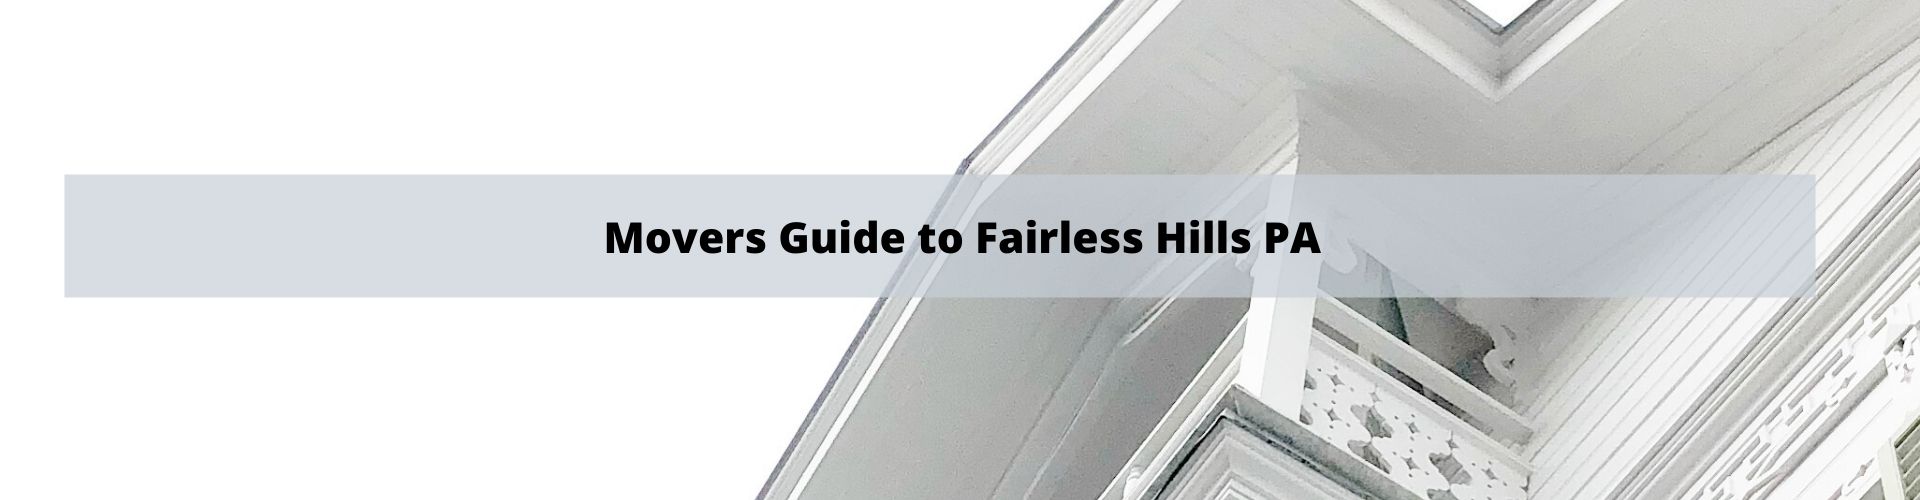 Mover's Guide to Fairless Hills PA